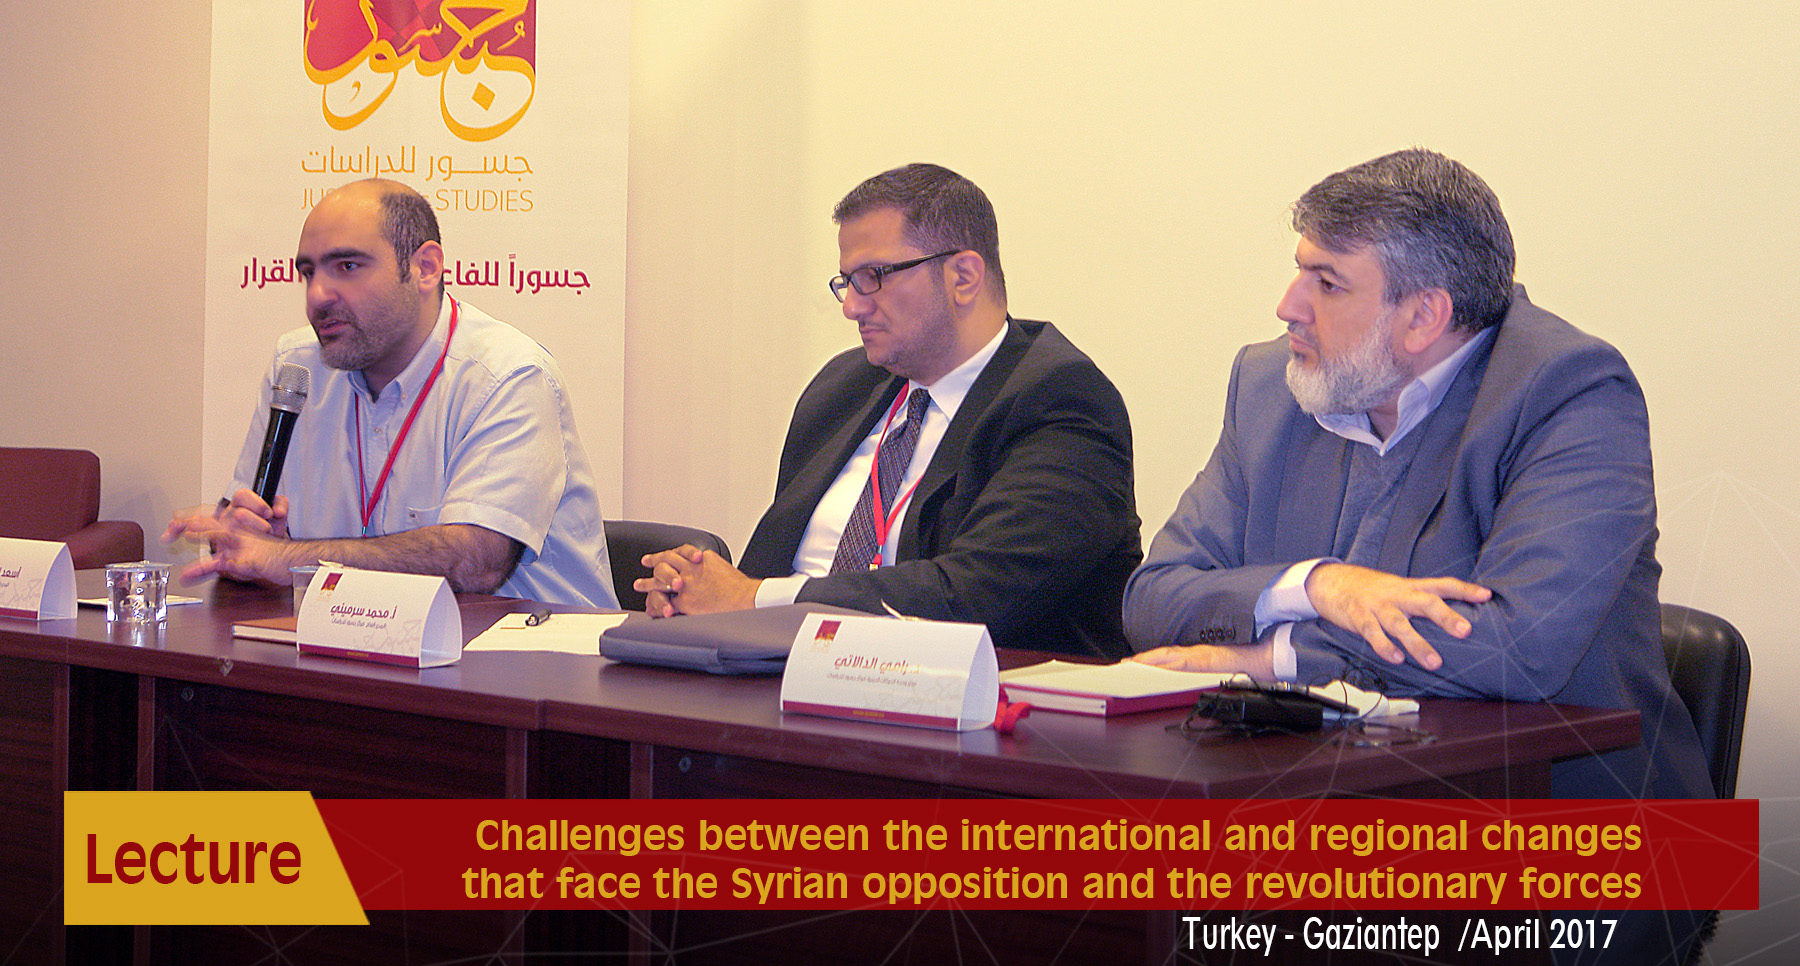 Challenges between the international and regional changes that face the Syrian opposition and the revolutionary forces